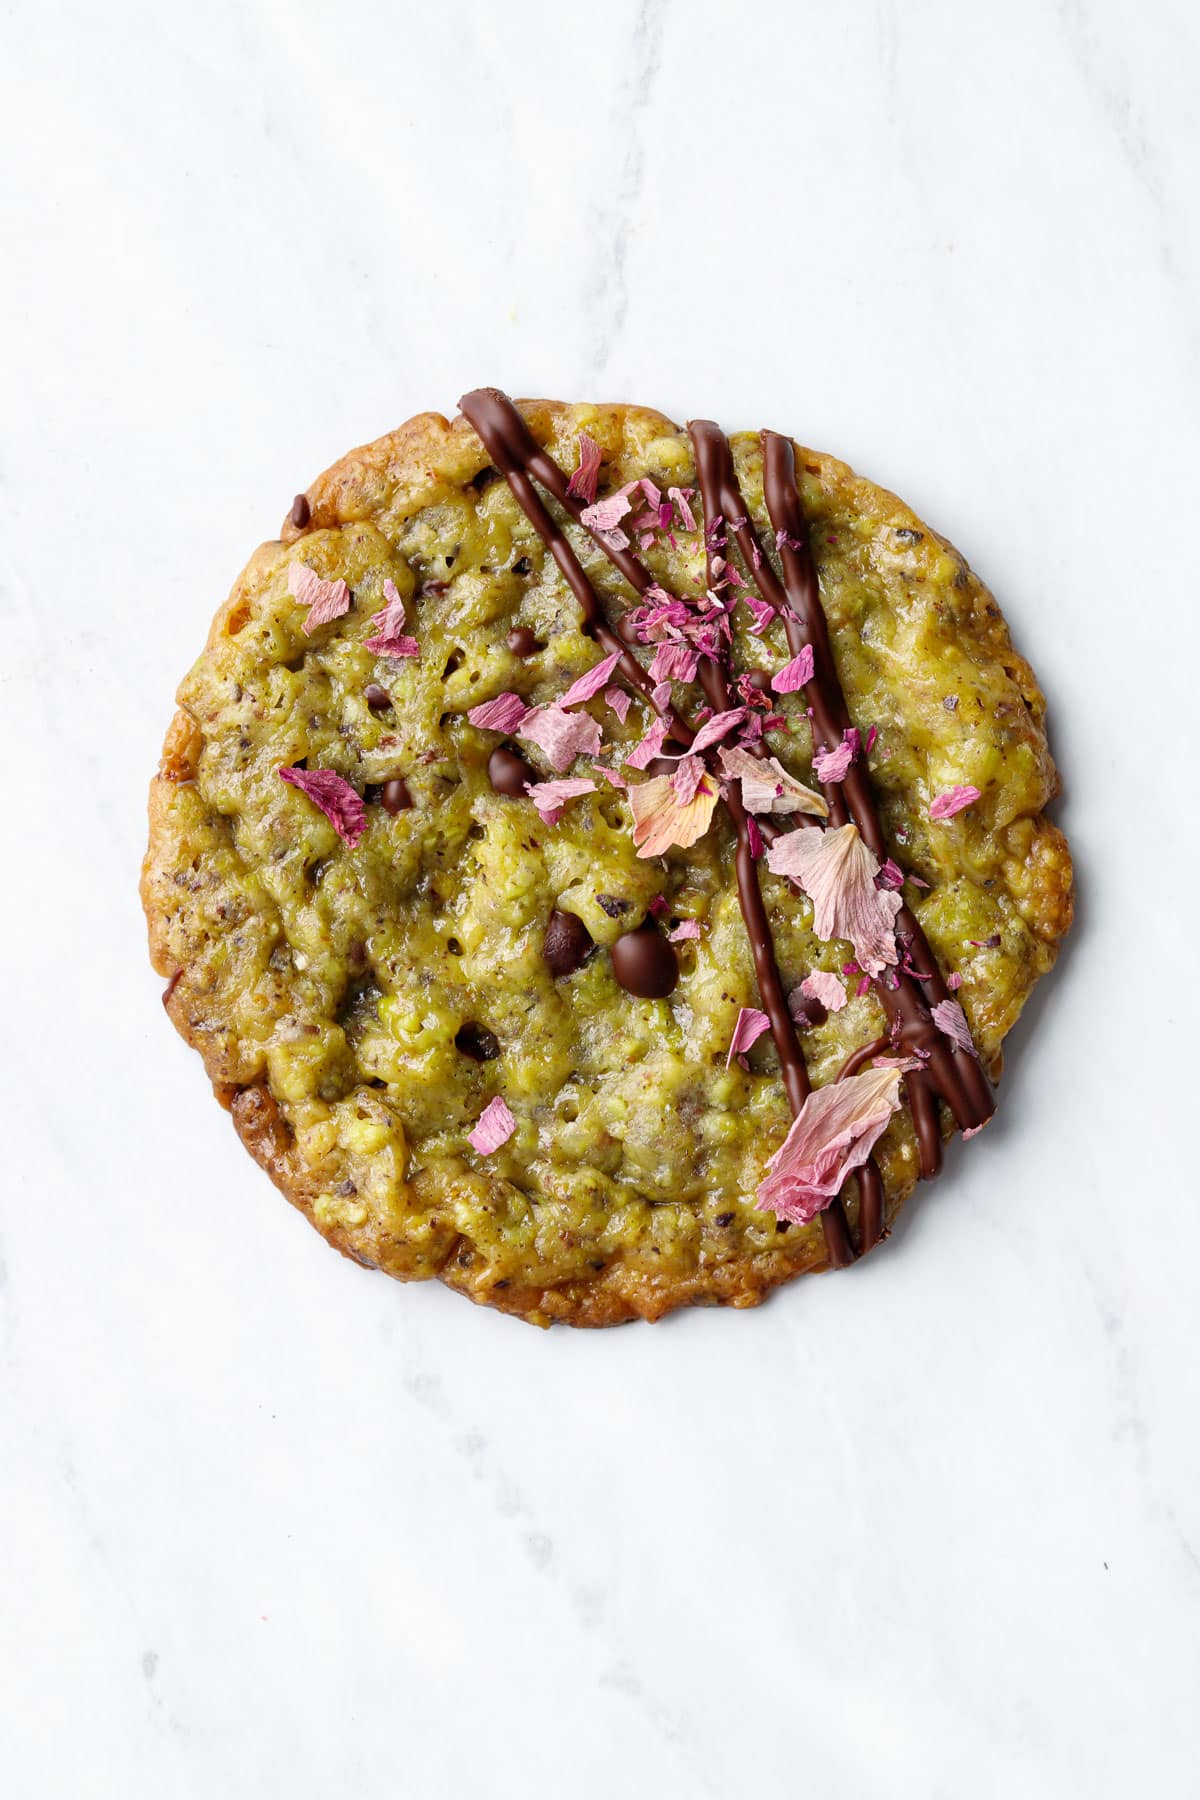 Closeup, single Pistachio Florentine Cookie on a marble background, drizzled with off-center stripes of dark chocolate and sprinkled with dried rose petals.